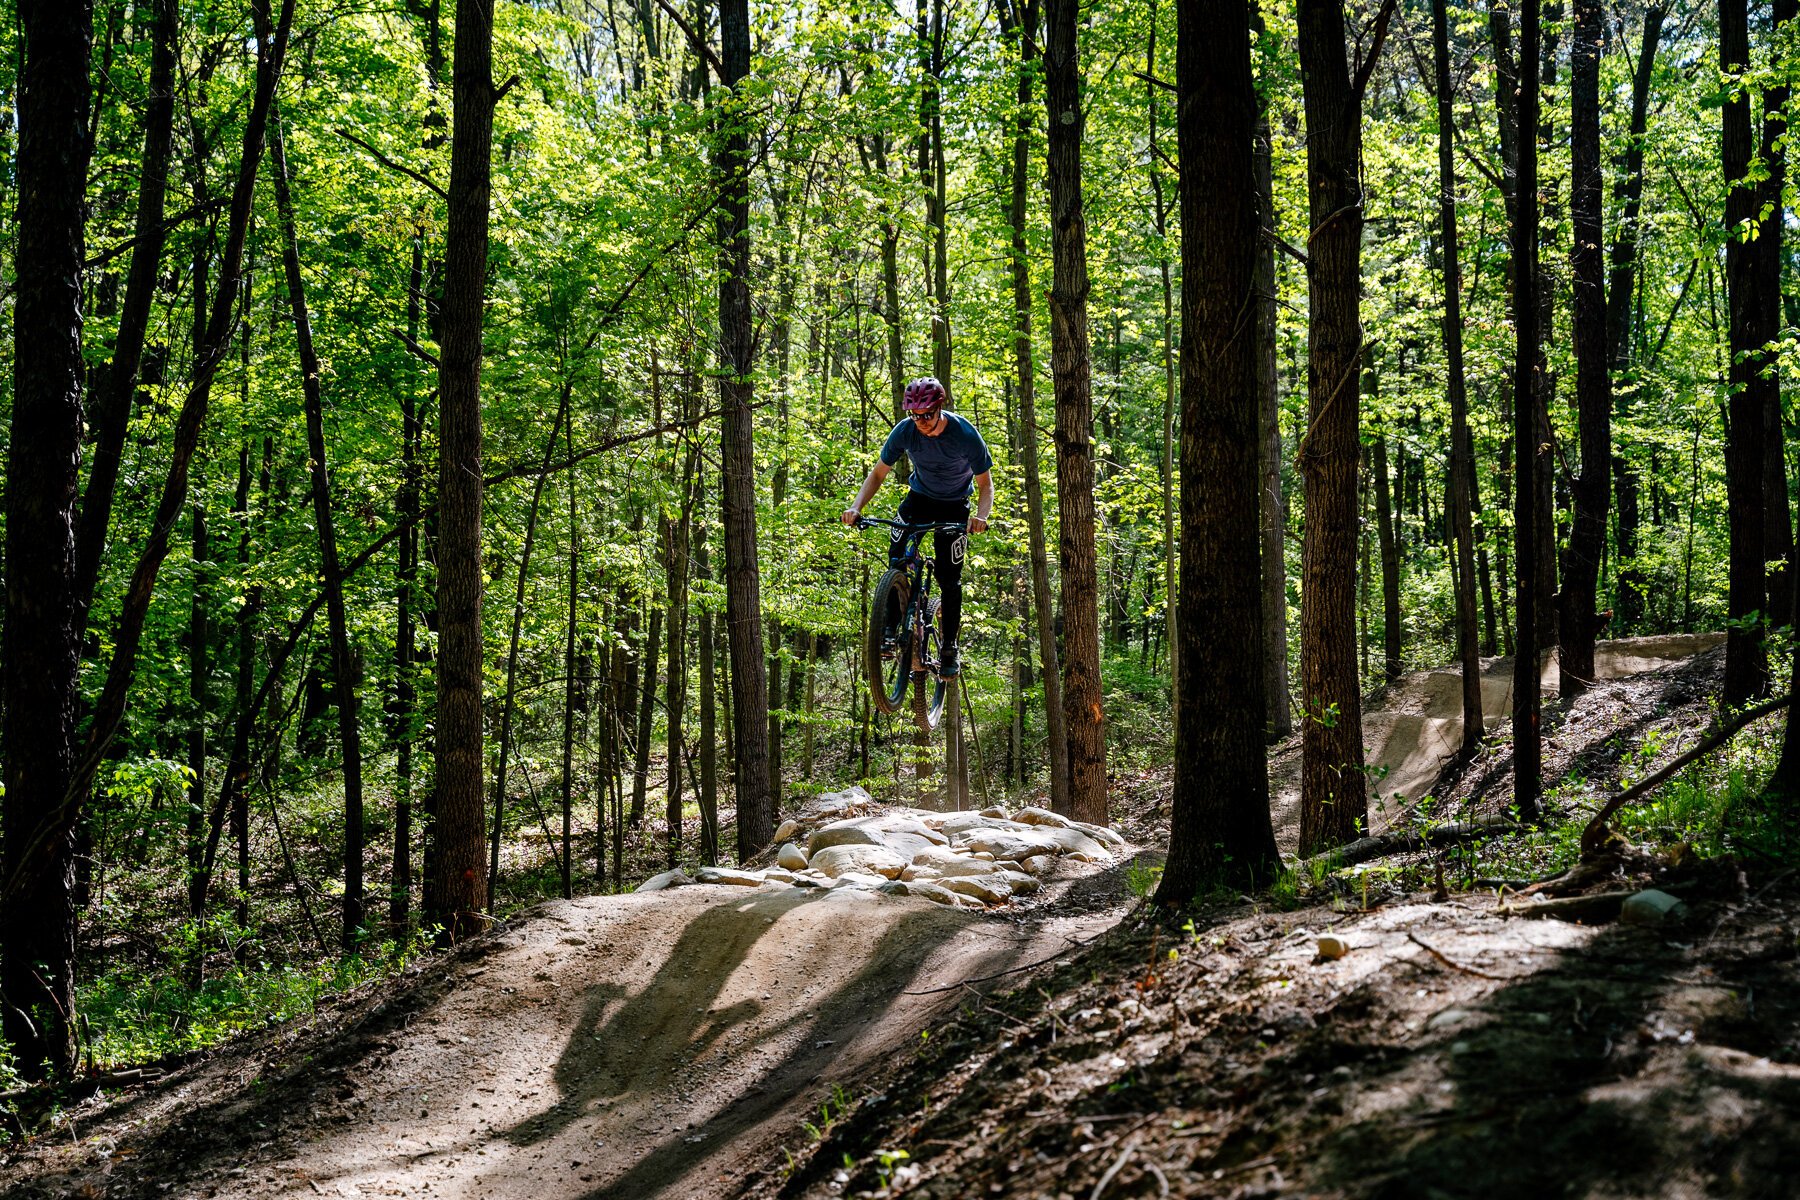 Rivers Whitson rides the Shelden Trails at Stony Creek Metropark.